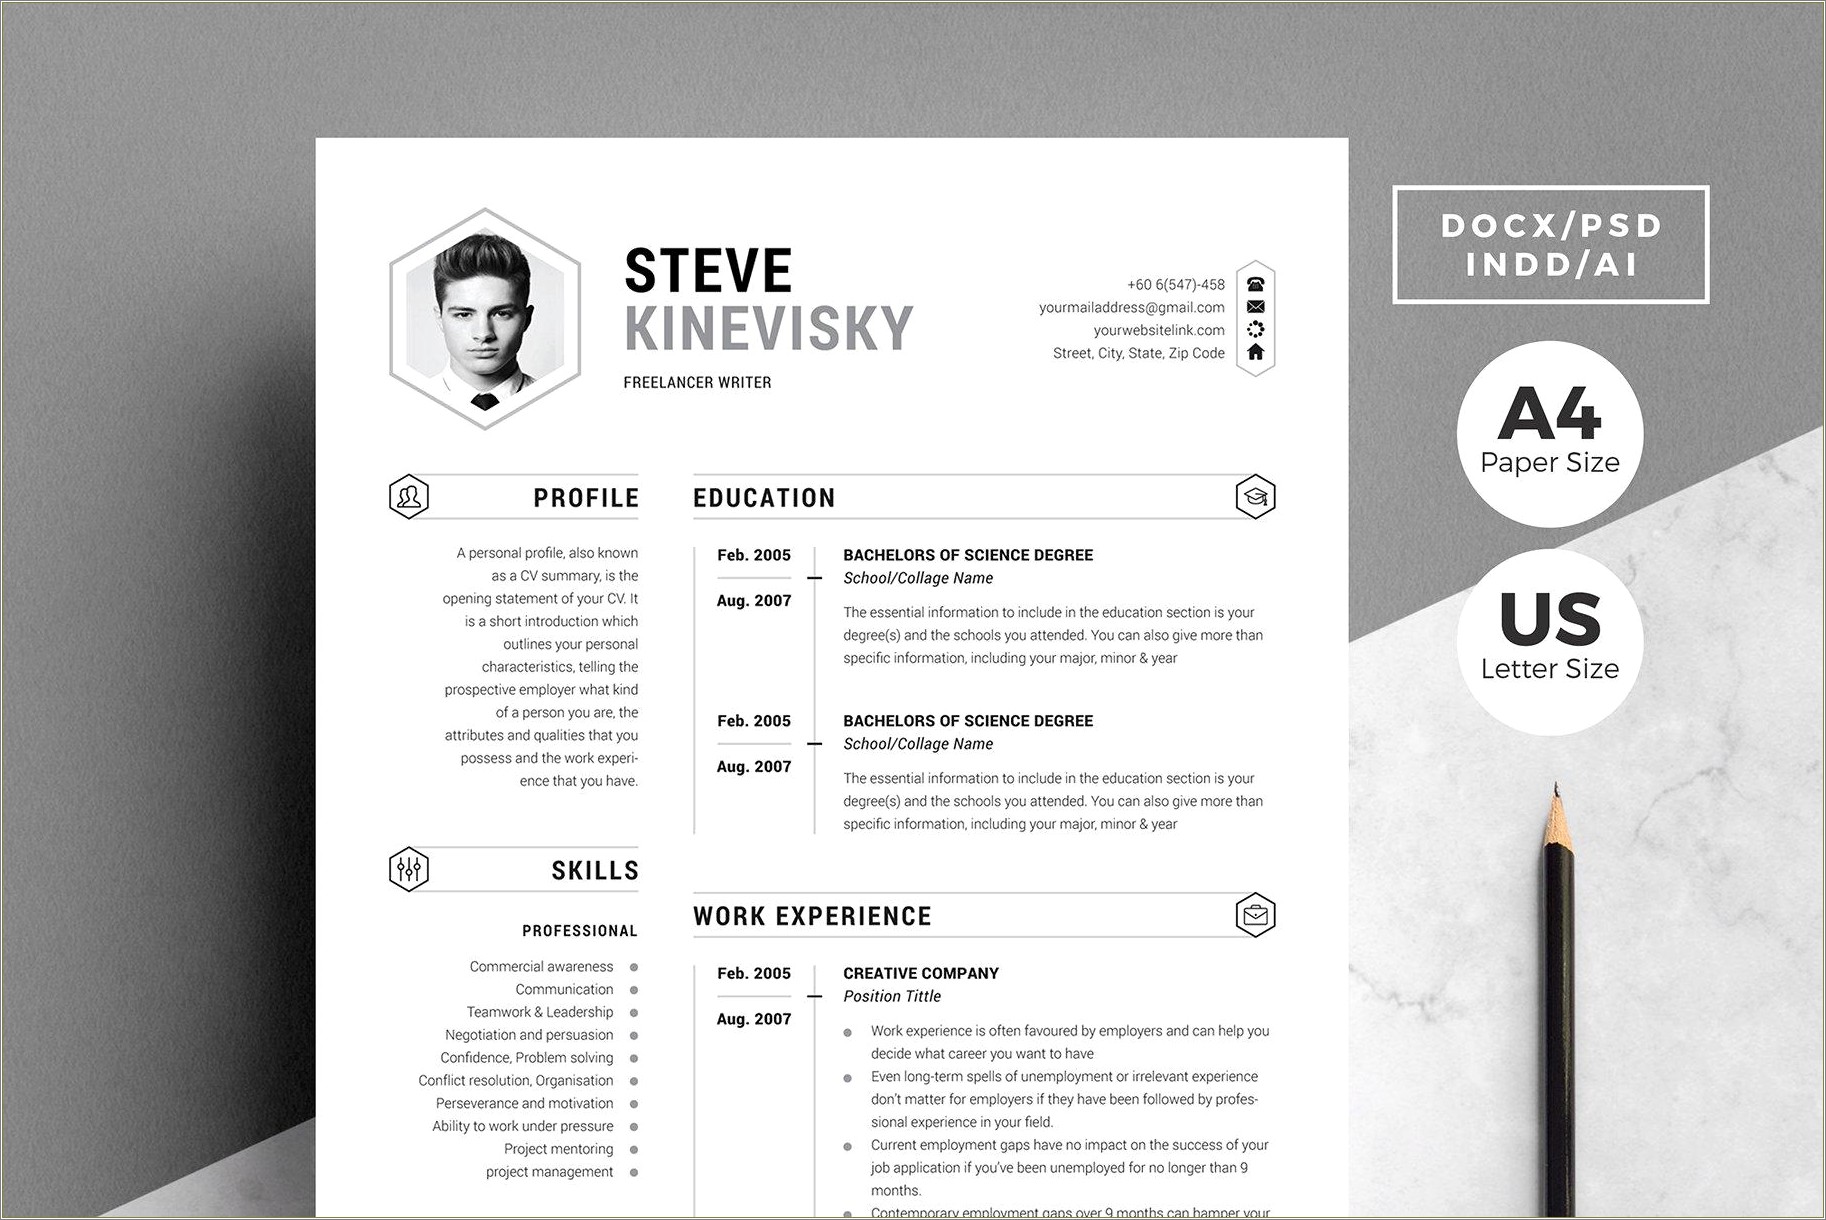 Resume Worked With Aiming A Publication